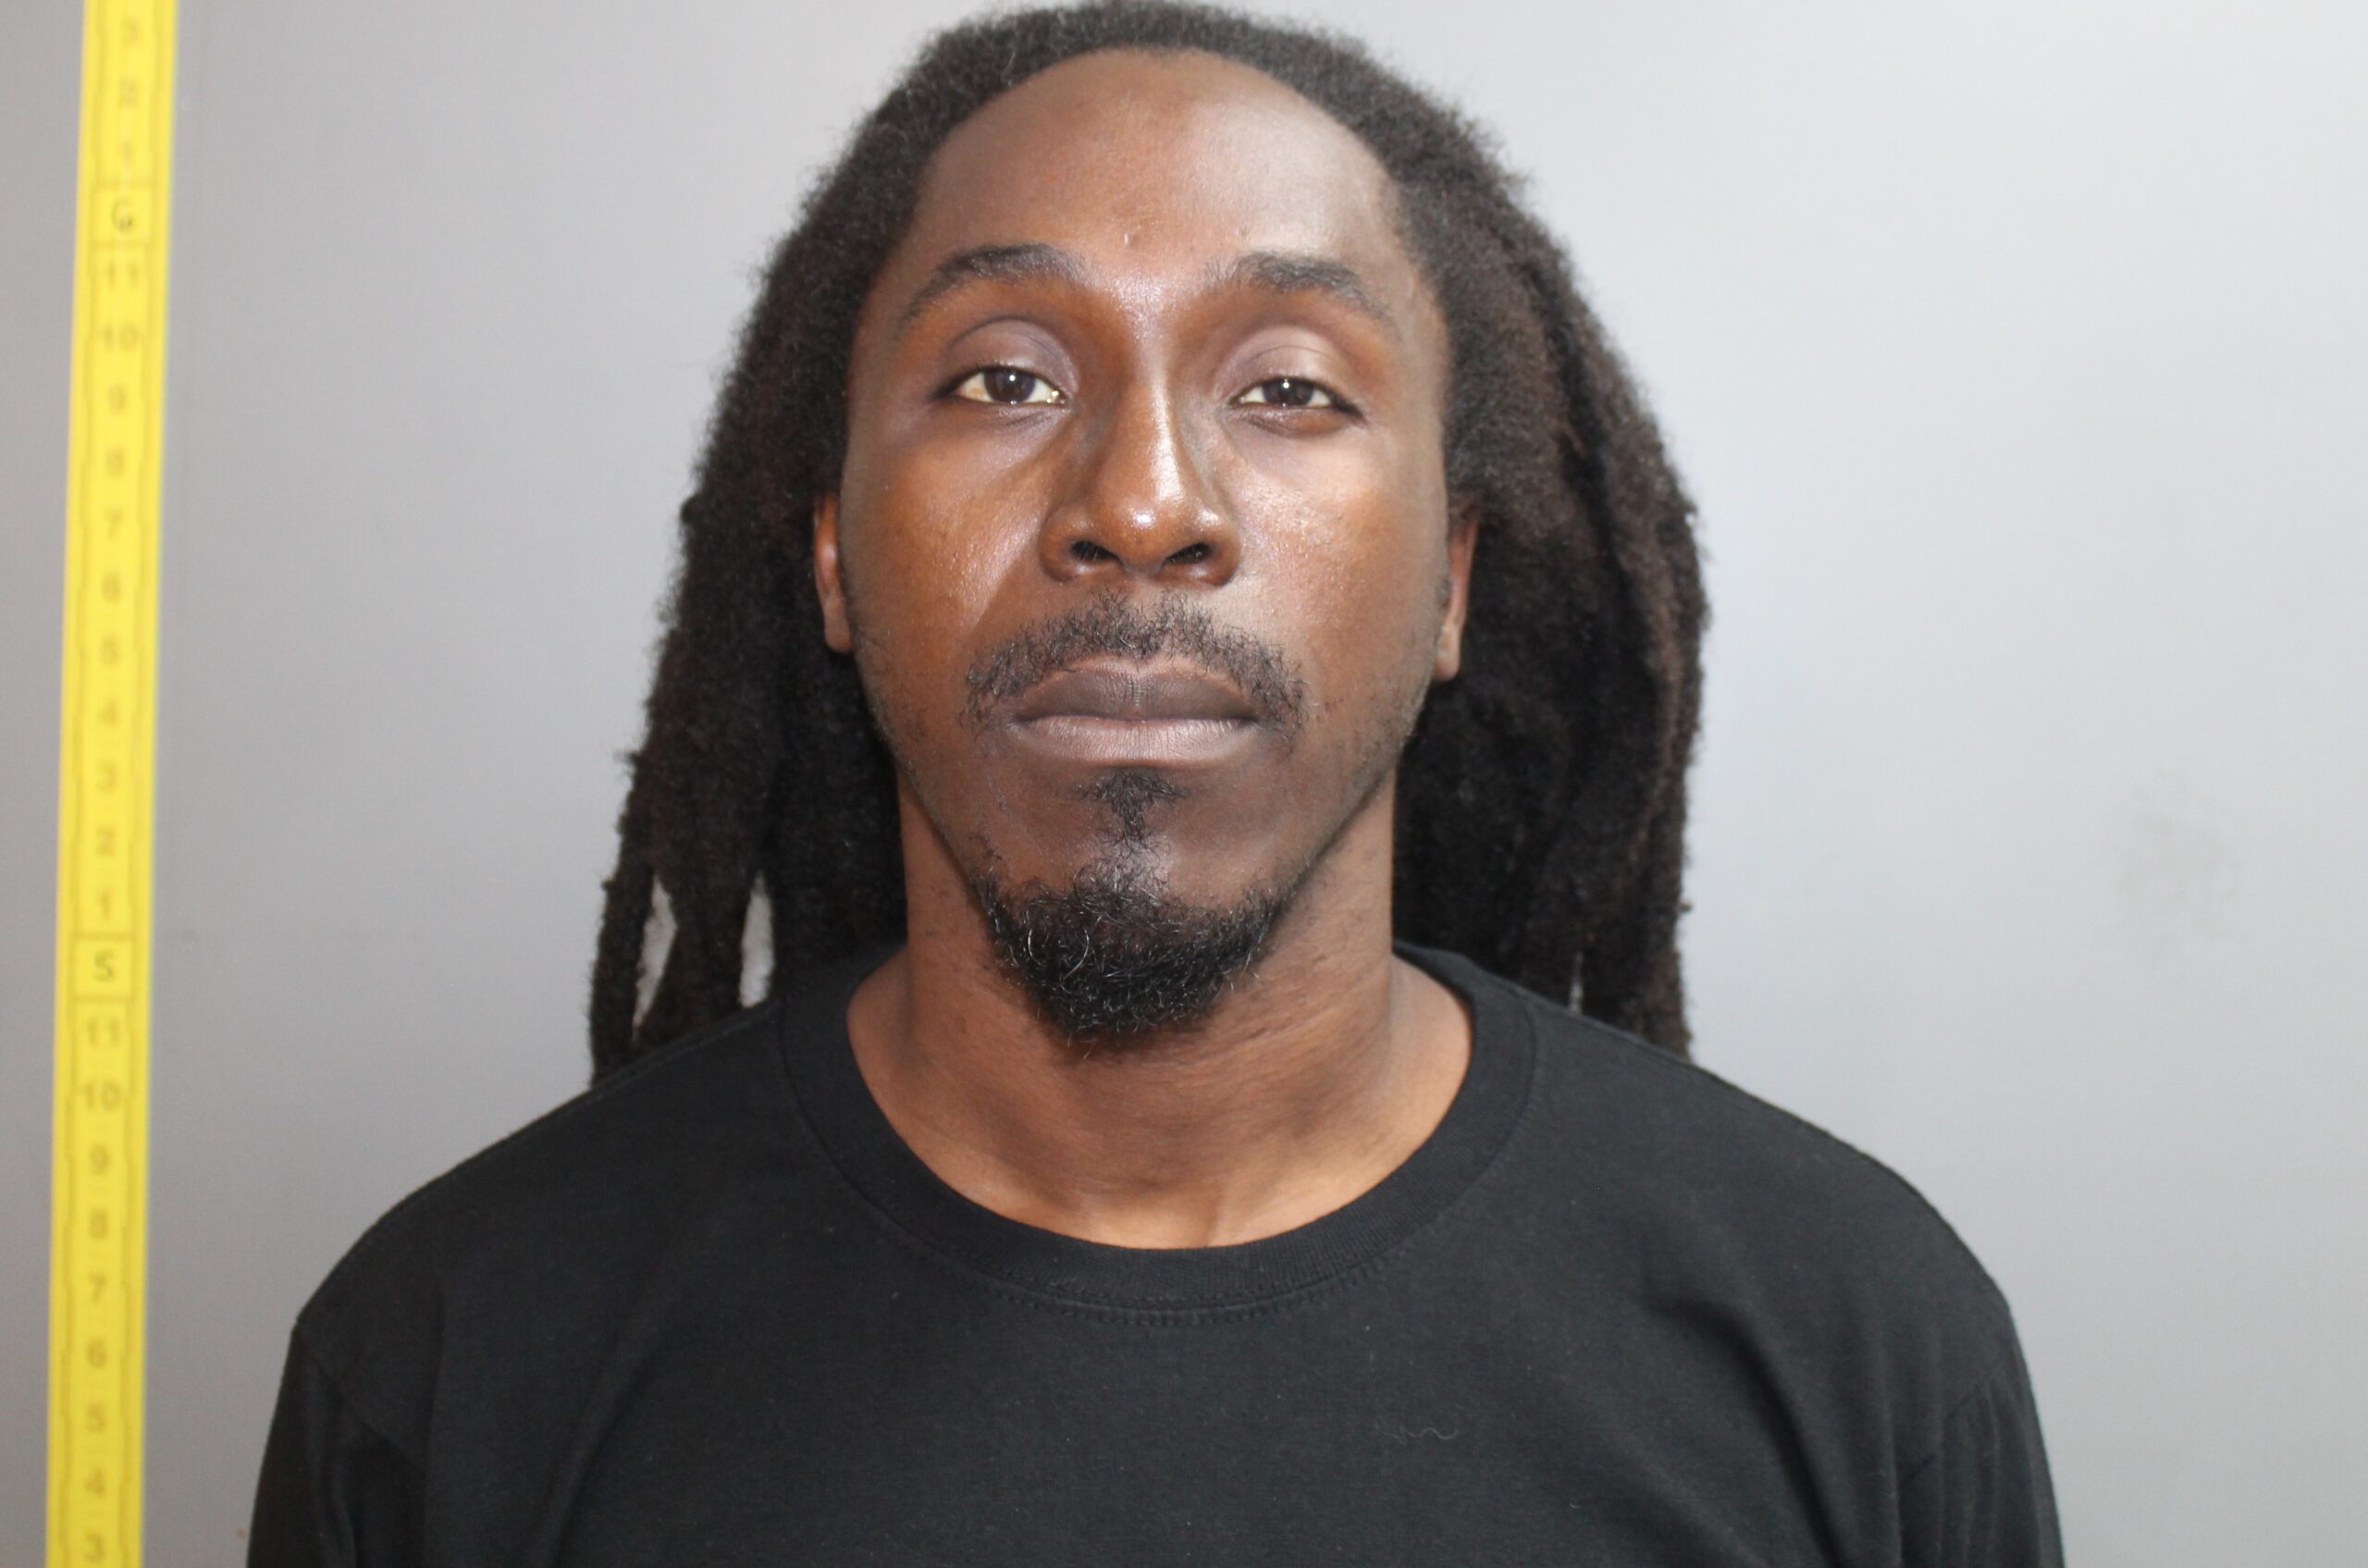 St. Croix Man Arrested After Gun Linked To Shooting Death of 9-Year-Old Boy: VIPD